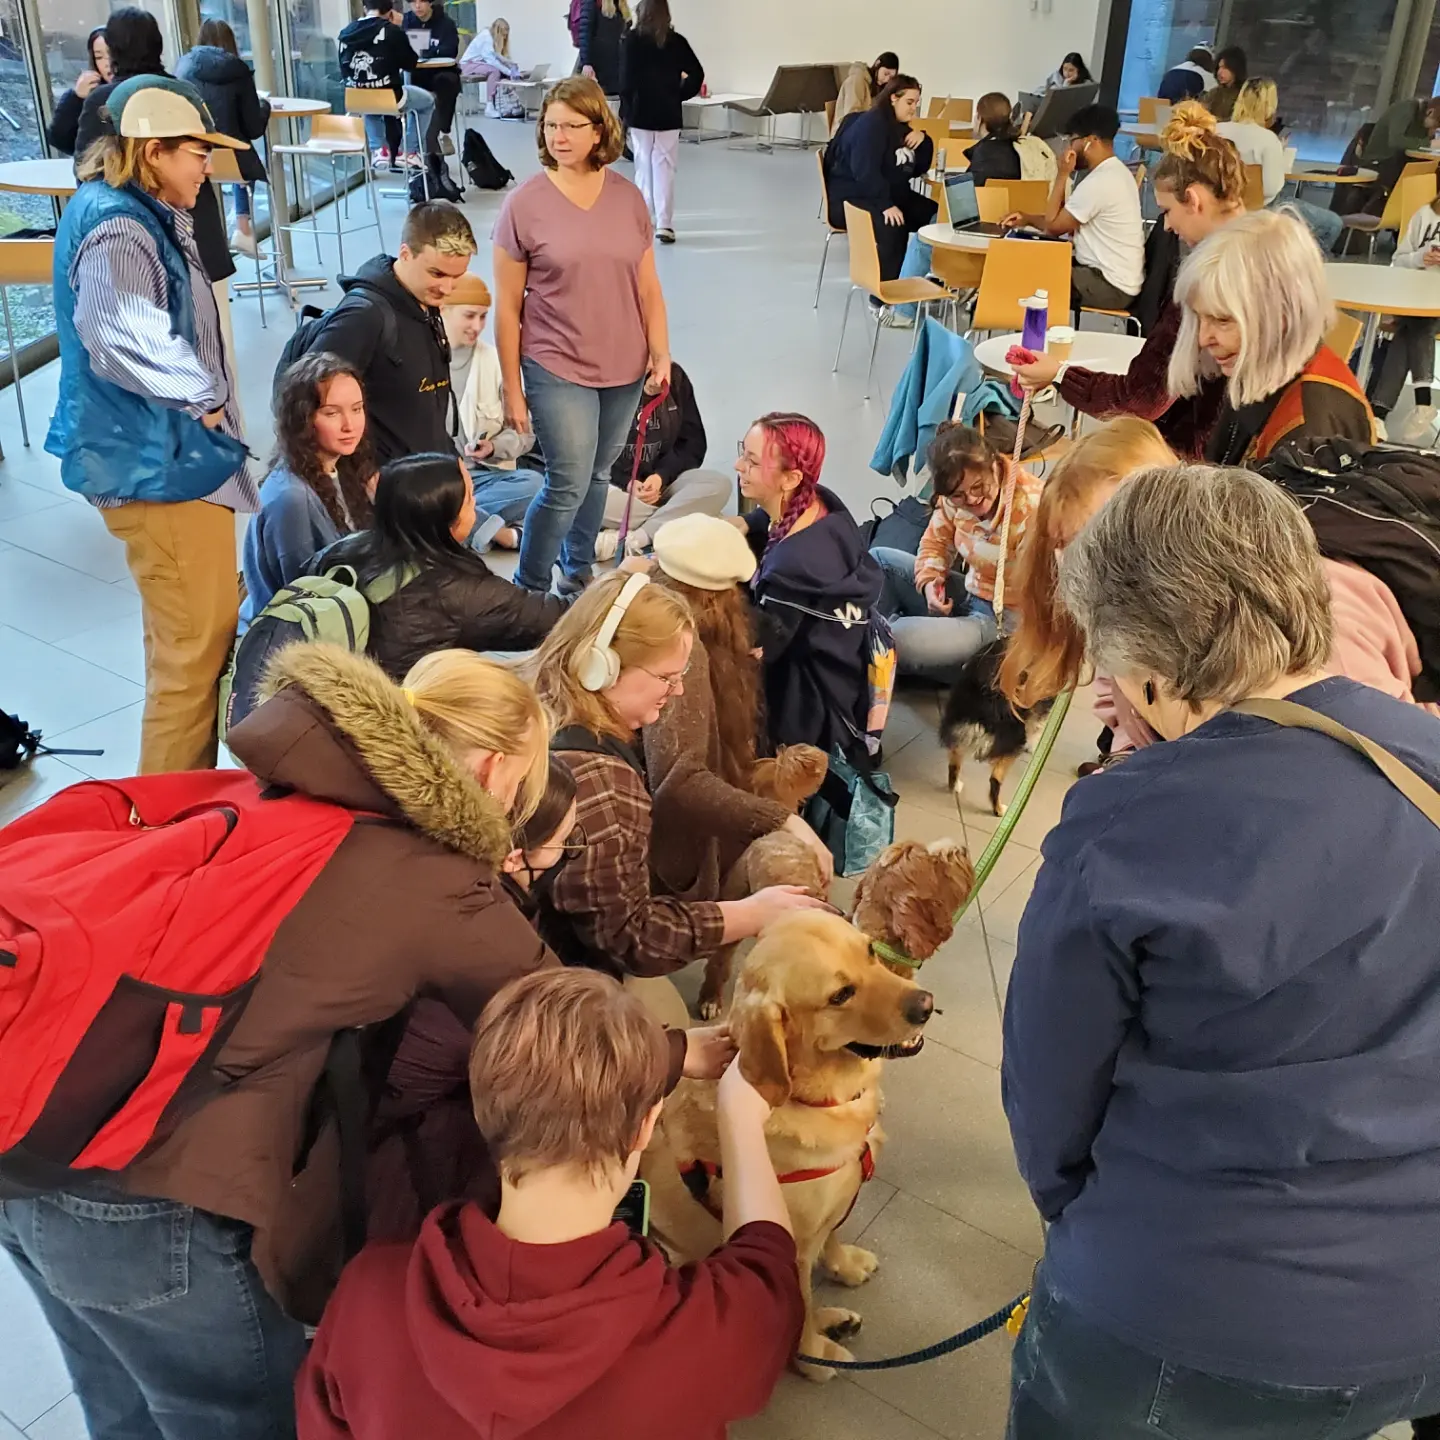 Students and staff clustered around cute dogs on World Kindness Day